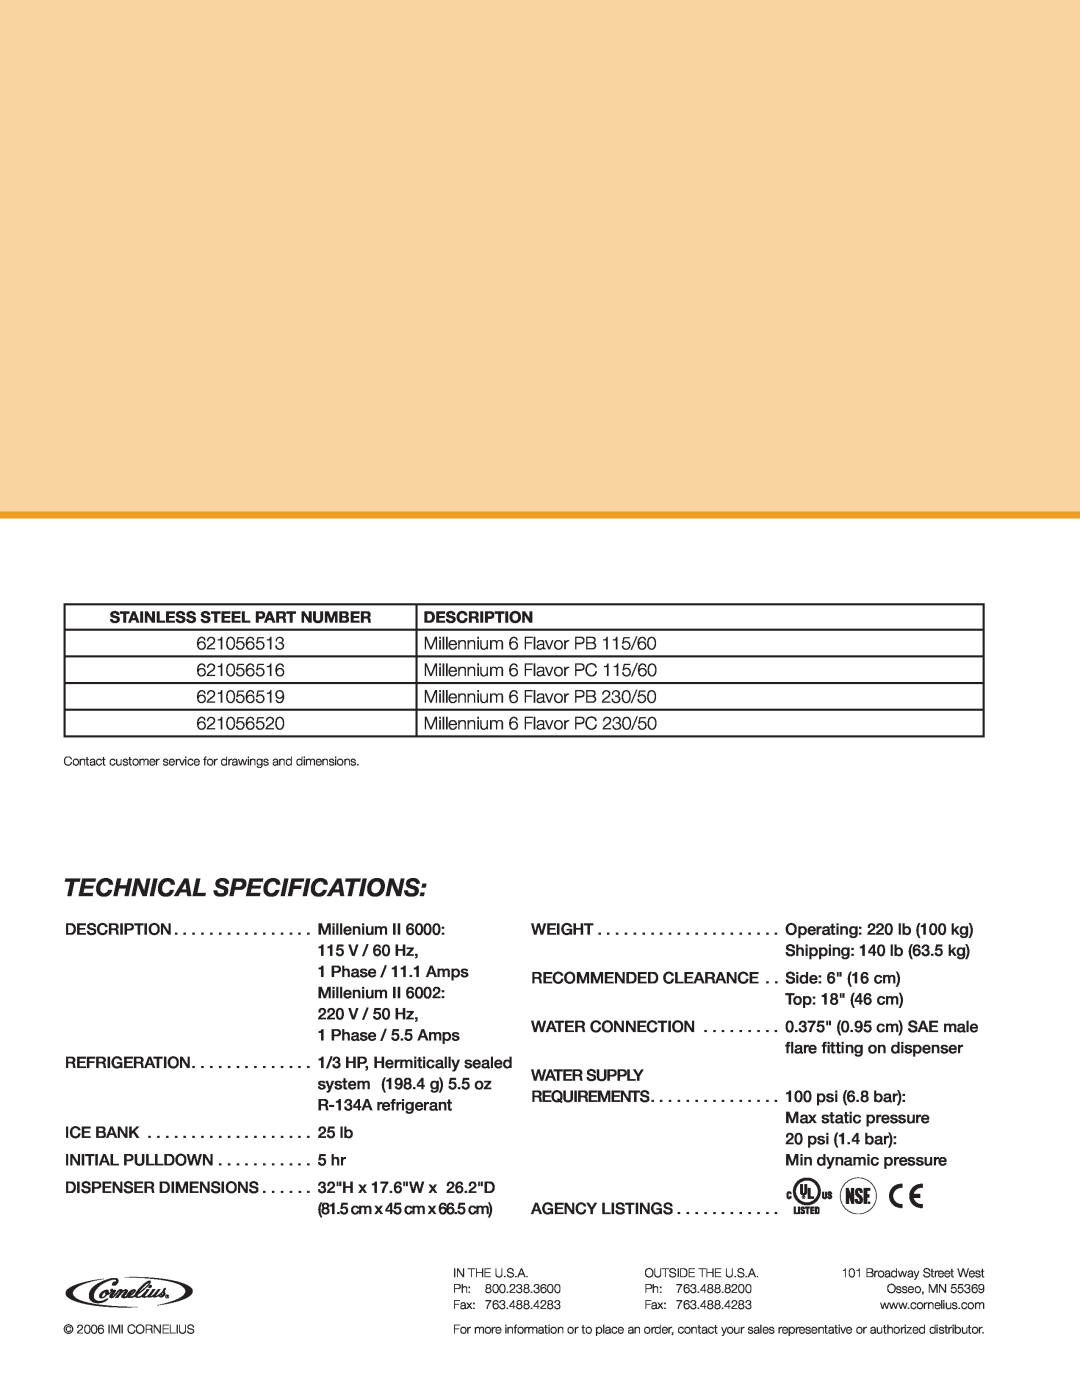 Cornelius 6000 manual Technical Specifications, Stainless Steel Part Number, Description 